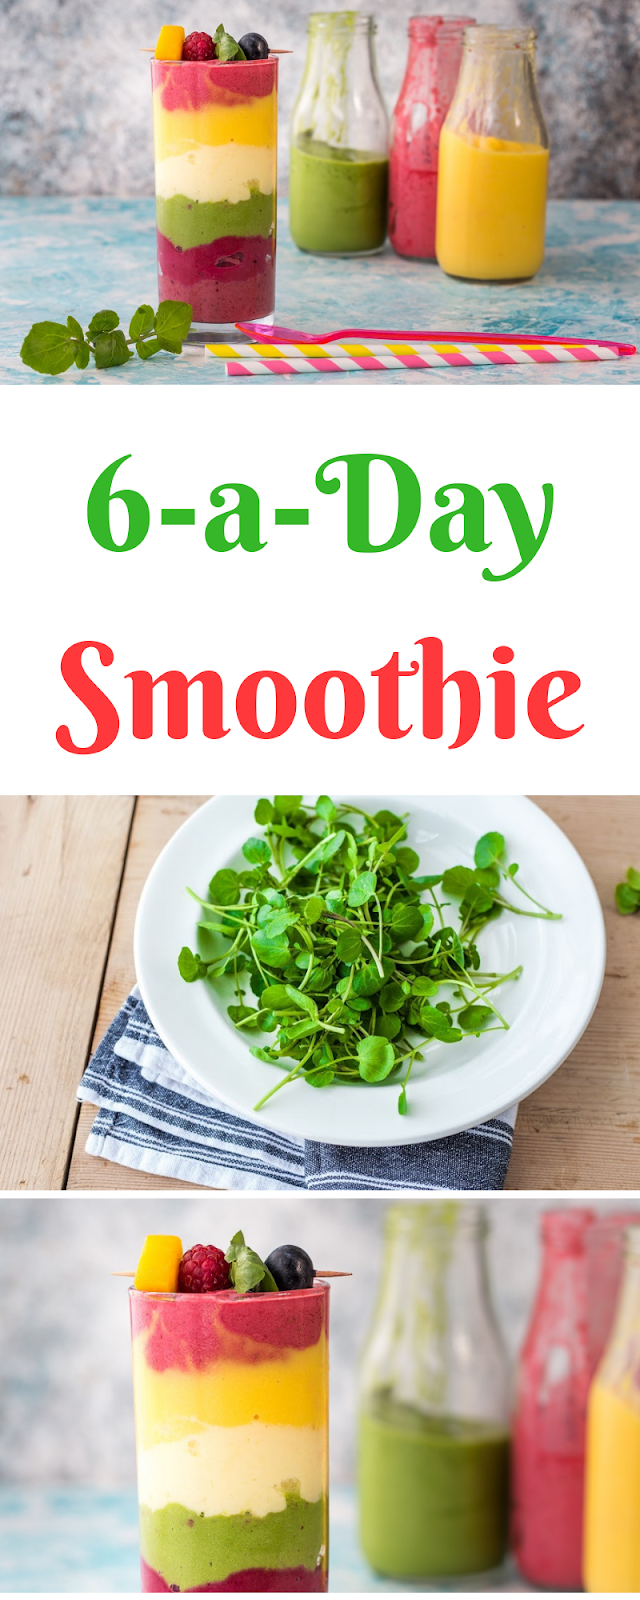 6-a-Day Smoothie: Back to School with Watercress